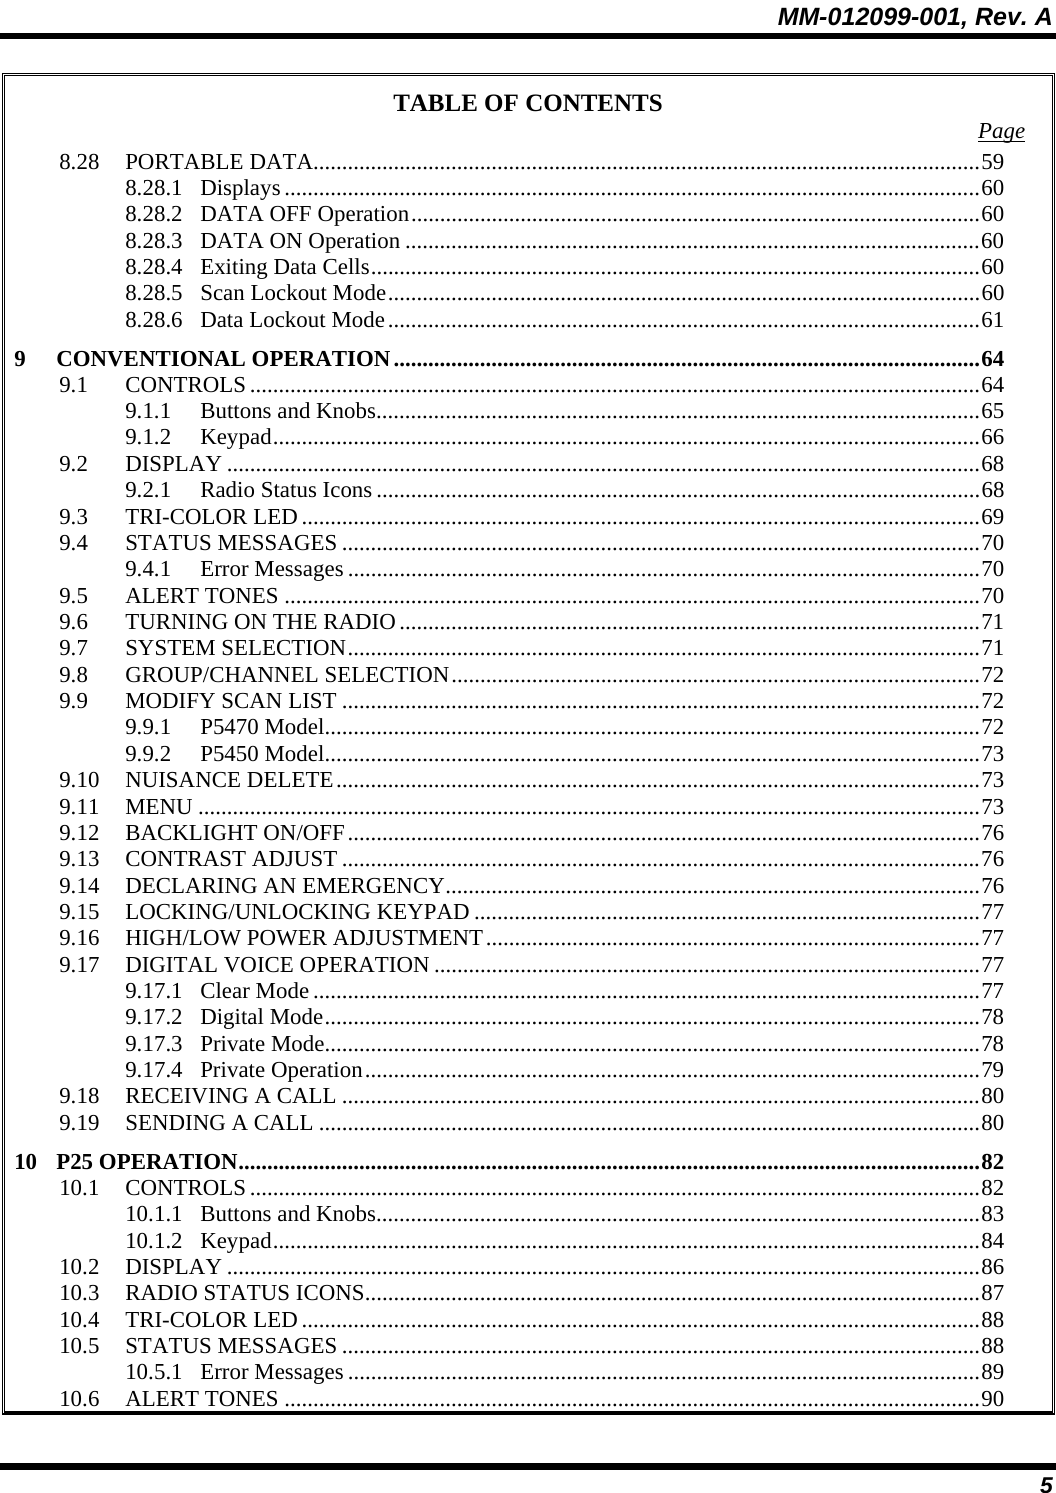 MM-012099-001, Rev. A 5 TABLE OF CONTENTS  Page 8.28 PORTABLE DATA....................................................................................................................59 8.28.1 Displays .........................................................................................................................60 8.28.2 DATA OFF Operation...................................................................................................60 8.28.3 DATA ON Operation ....................................................................................................60 8.28.4 Exiting Data Cells..........................................................................................................60 8.28.5 Scan Lockout Mode.......................................................................................................60 8.28.6 Data Lockout Mode.......................................................................................................61 9 CONVENTIONAL OPERATION......................................................................................................64 9.1 CONTROLS...............................................................................................................................64 9.1.1 Buttons and Knobs.........................................................................................................65 9.1.2 Keypad...........................................................................................................................66 9.2 DISPLAY ...................................................................................................................................68 9.2.1 Radio Status Icons .........................................................................................................68 9.3 TRI-COLOR LED......................................................................................................................69 9.4 STATUS MESSAGES ...............................................................................................................70 9.4.1 Error Messages ..............................................................................................................70 9.5 ALERT TONES .........................................................................................................................70 9.6 TURNING ON THE RADIO.....................................................................................................71 9.7 SYSTEM SELECTION..............................................................................................................71 9.8 GROUP/CHANNEL SELECTION............................................................................................72 9.9 MODIFY SCAN LIST ...............................................................................................................72 9.9.1 P5470 Model..................................................................................................................72 9.9.2 P5450 Model..................................................................................................................73 9.10 NUISANCE DELETE................................................................................................................73 9.11 MENU ........................................................................................................................................73 9.12 BACKLIGHT ON/OFF..............................................................................................................76 9.13 CONTRAST ADJUST ...............................................................................................................76 9.14 DECLARING AN EMERGENCY.............................................................................................76 9.15 LOCKING/UNLOCKING KEYPAD ........................................................................................77 9.16 HIGH/LOW POWER ADJUSTMENT......................................................................................77 9.17 DIGITAL VOICE OPERATION ...............................................................................................77 9.17.1 Clear Mode....................................................................................................................77 9.17.2 Digital Mode..................................................................................................................78 9.17.3 Private Mode..................................................................................................................78 9.17.4 Private Operation...........................................................................................................79 9.18 RECEIVING A CALL ...............................................................................................................80 9.19 SENDING A CALL ...................................................................................................................80 10 P25 OPERATION.................................................................................................................................82 10.1 CONTROLS...............................................................................................................................82 10.1.1 Buttons and Knobs.........................................................................................................83 10.1.2 Keypad...........................................................................................................................84 10.2 DISPLAY ...................................................................................................................................86 10.3 RADIO STATUS ICONS...........................................................................................................87 10.4 TRI-COLOR LED......................................................................................................................88 10.5 STATUS MESSAGES ...............................................................................................................88 10.5.1 Error Messages ..............................................................................................................89 10.6 ALERT TONES .........................................................................................................................90 